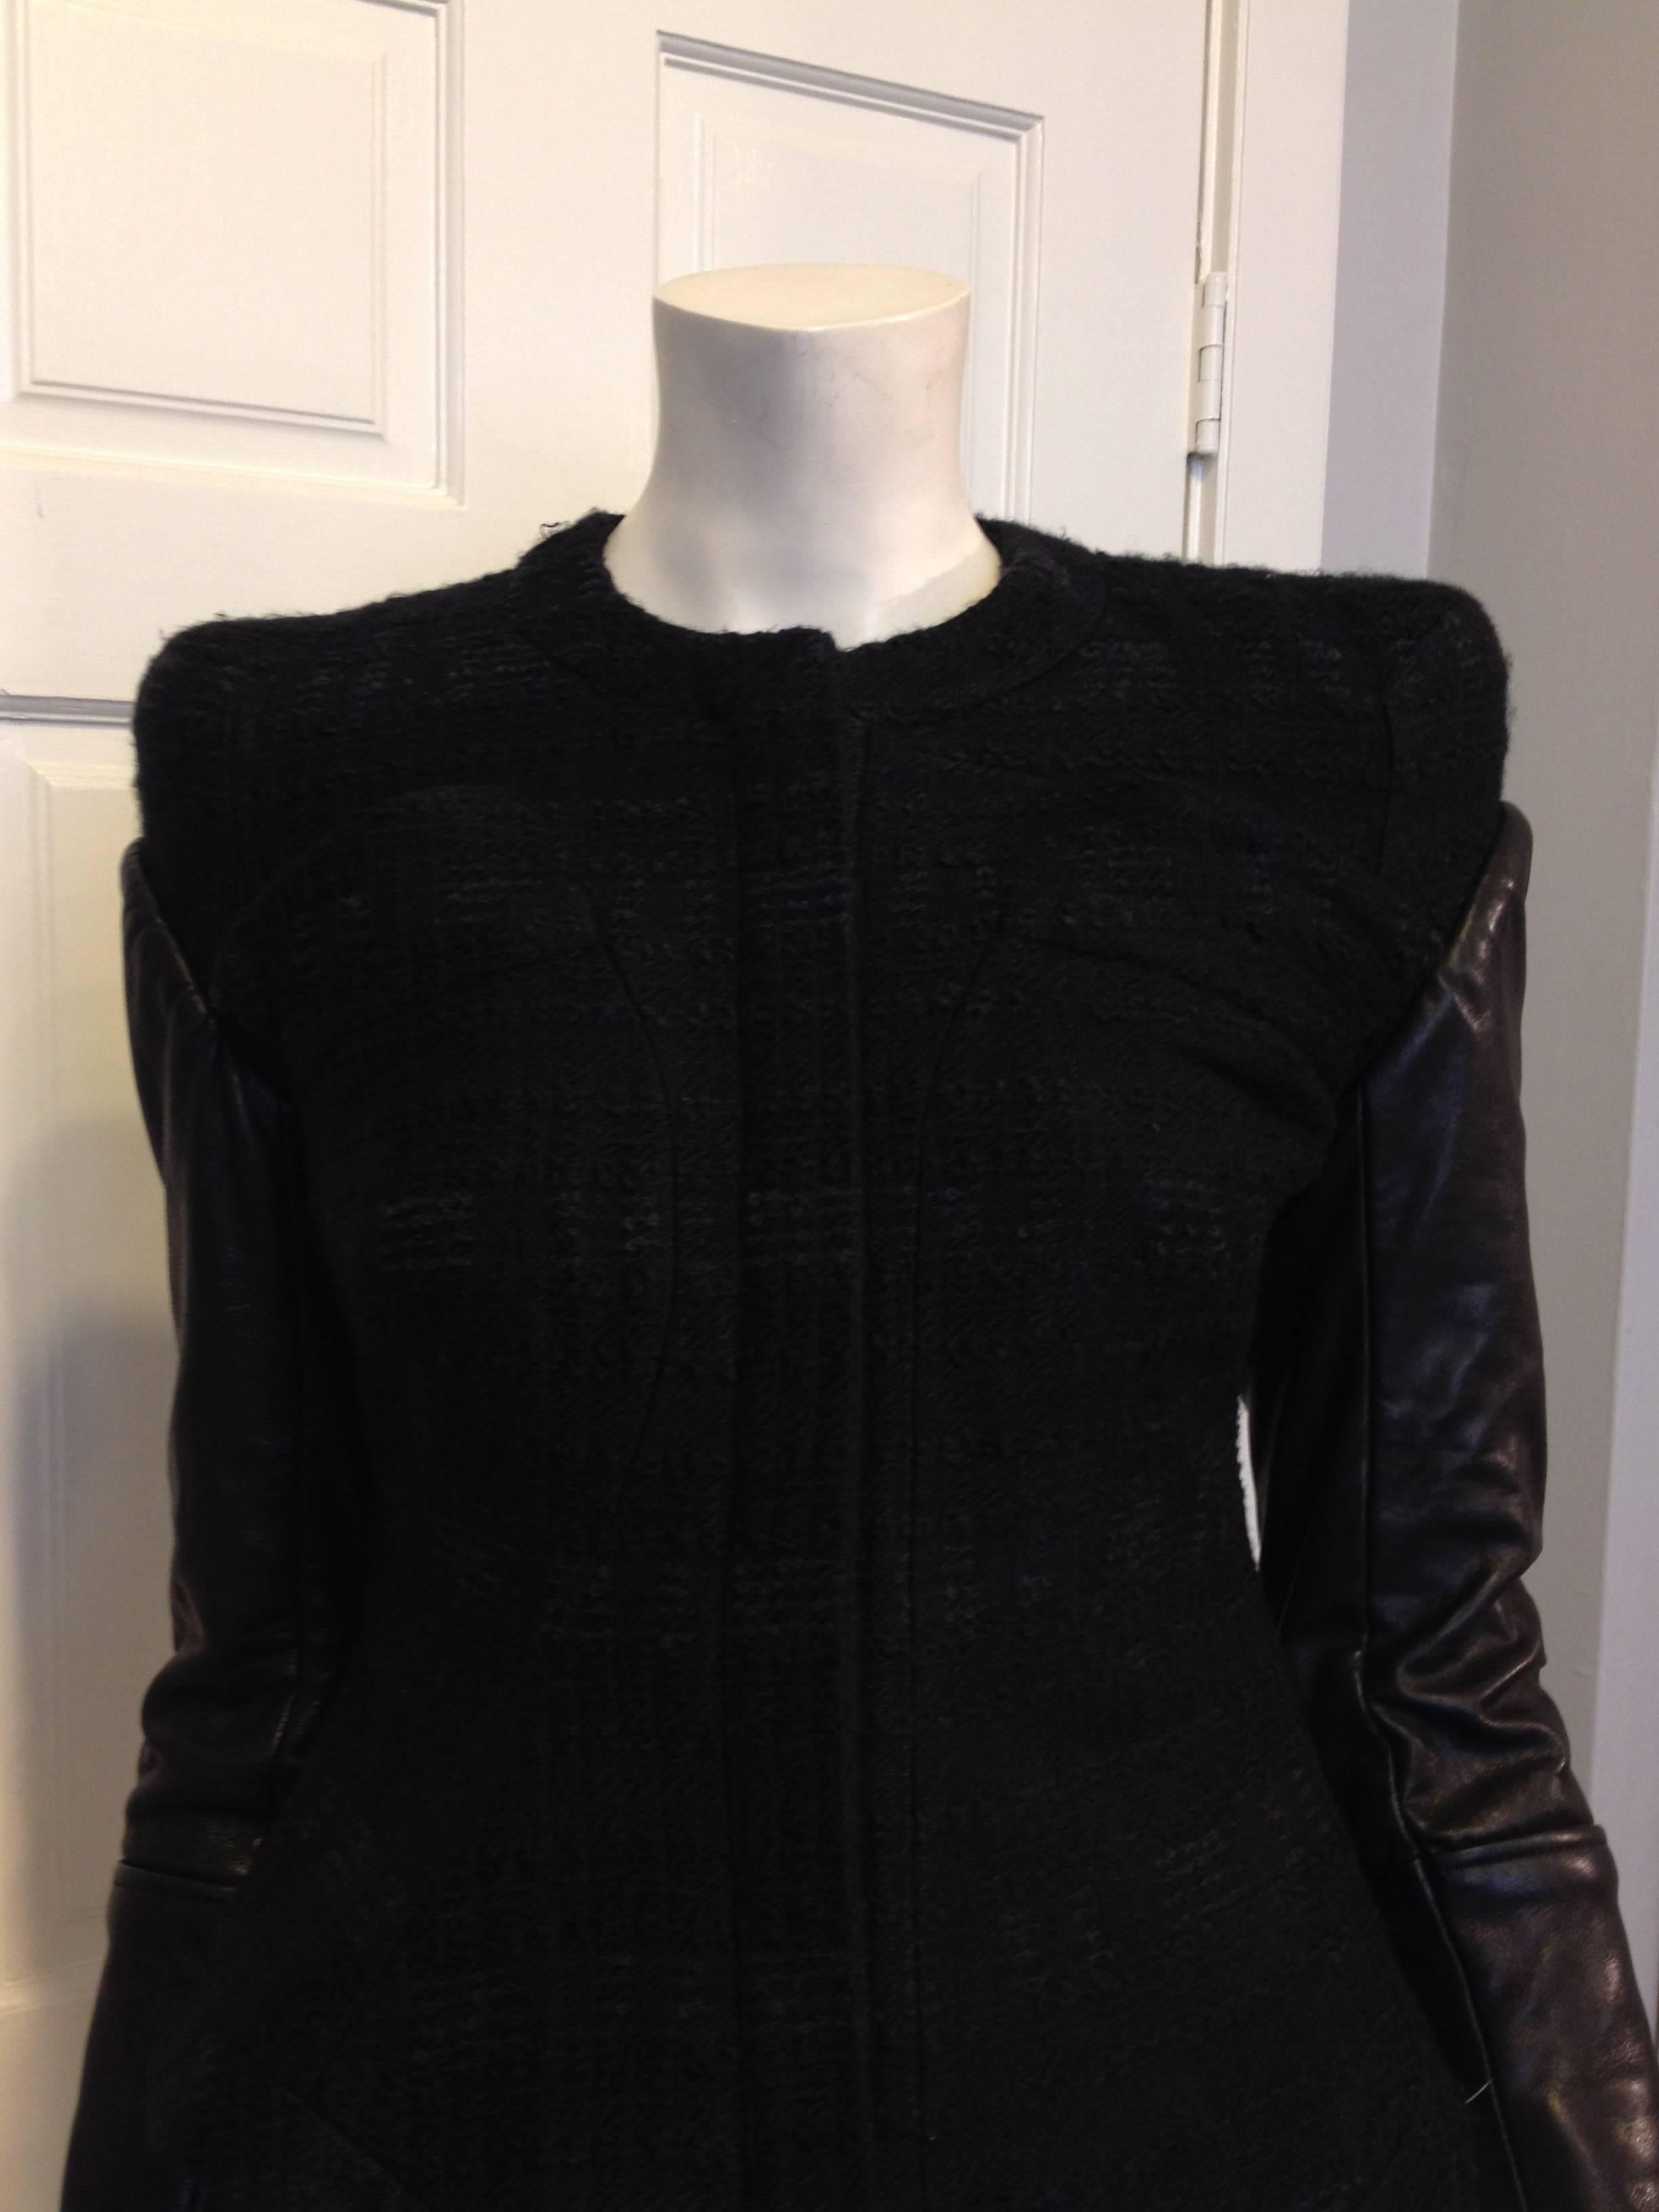 Women's Givenchy Black Tweed Jacket with Leather Sleeves